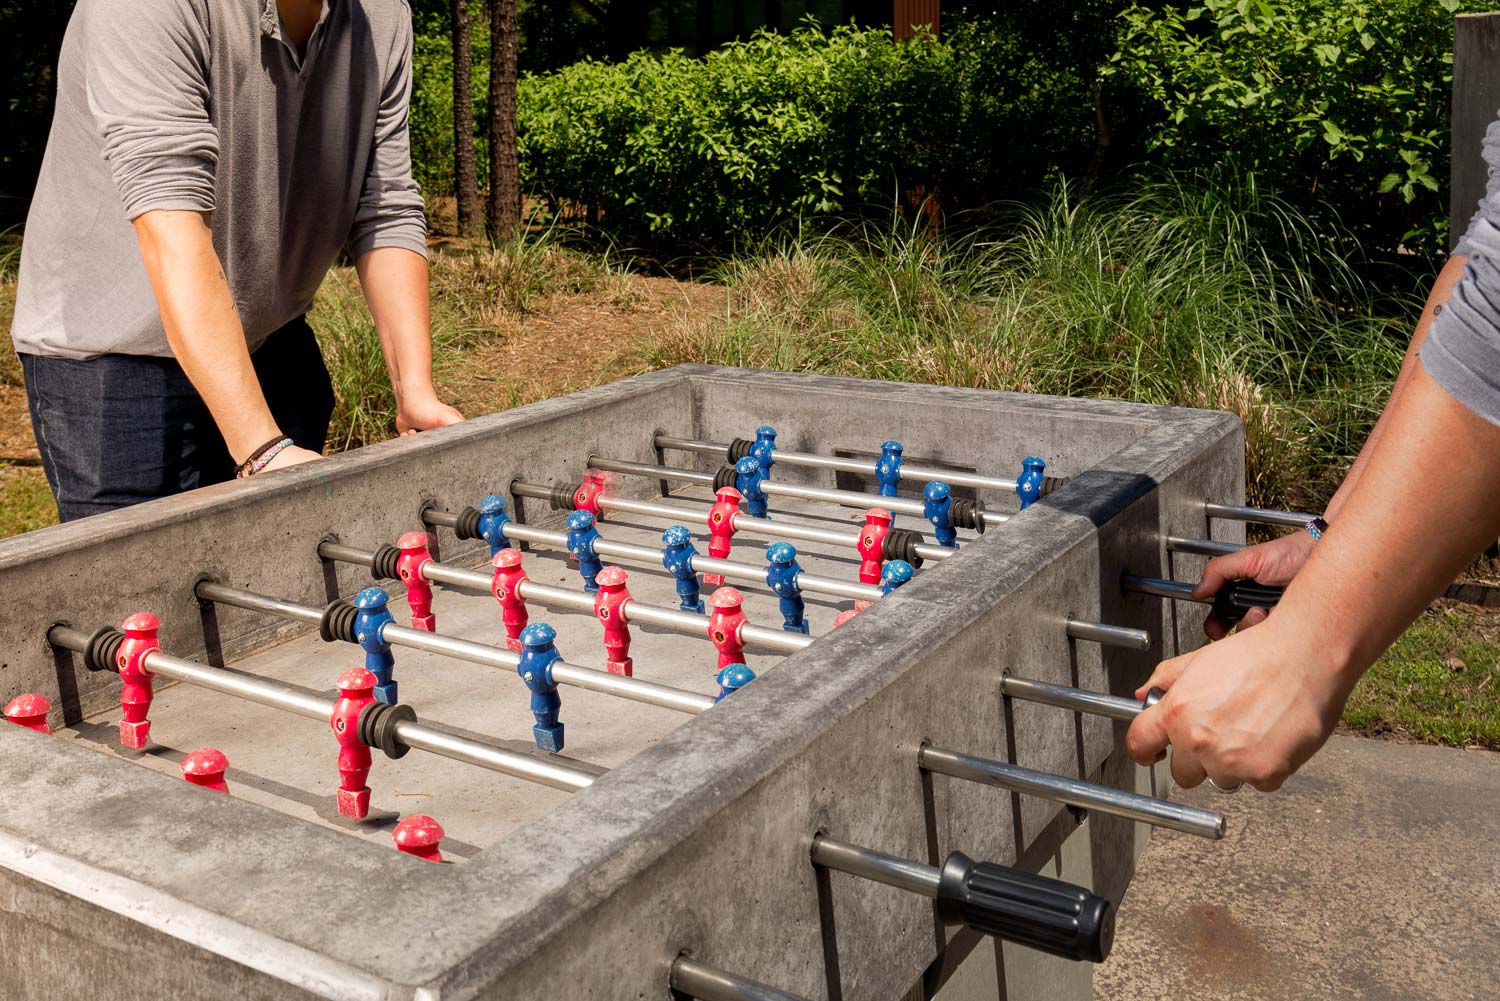 Outside the Lifestyle Center, residents can enjoy playing foosball with each other.